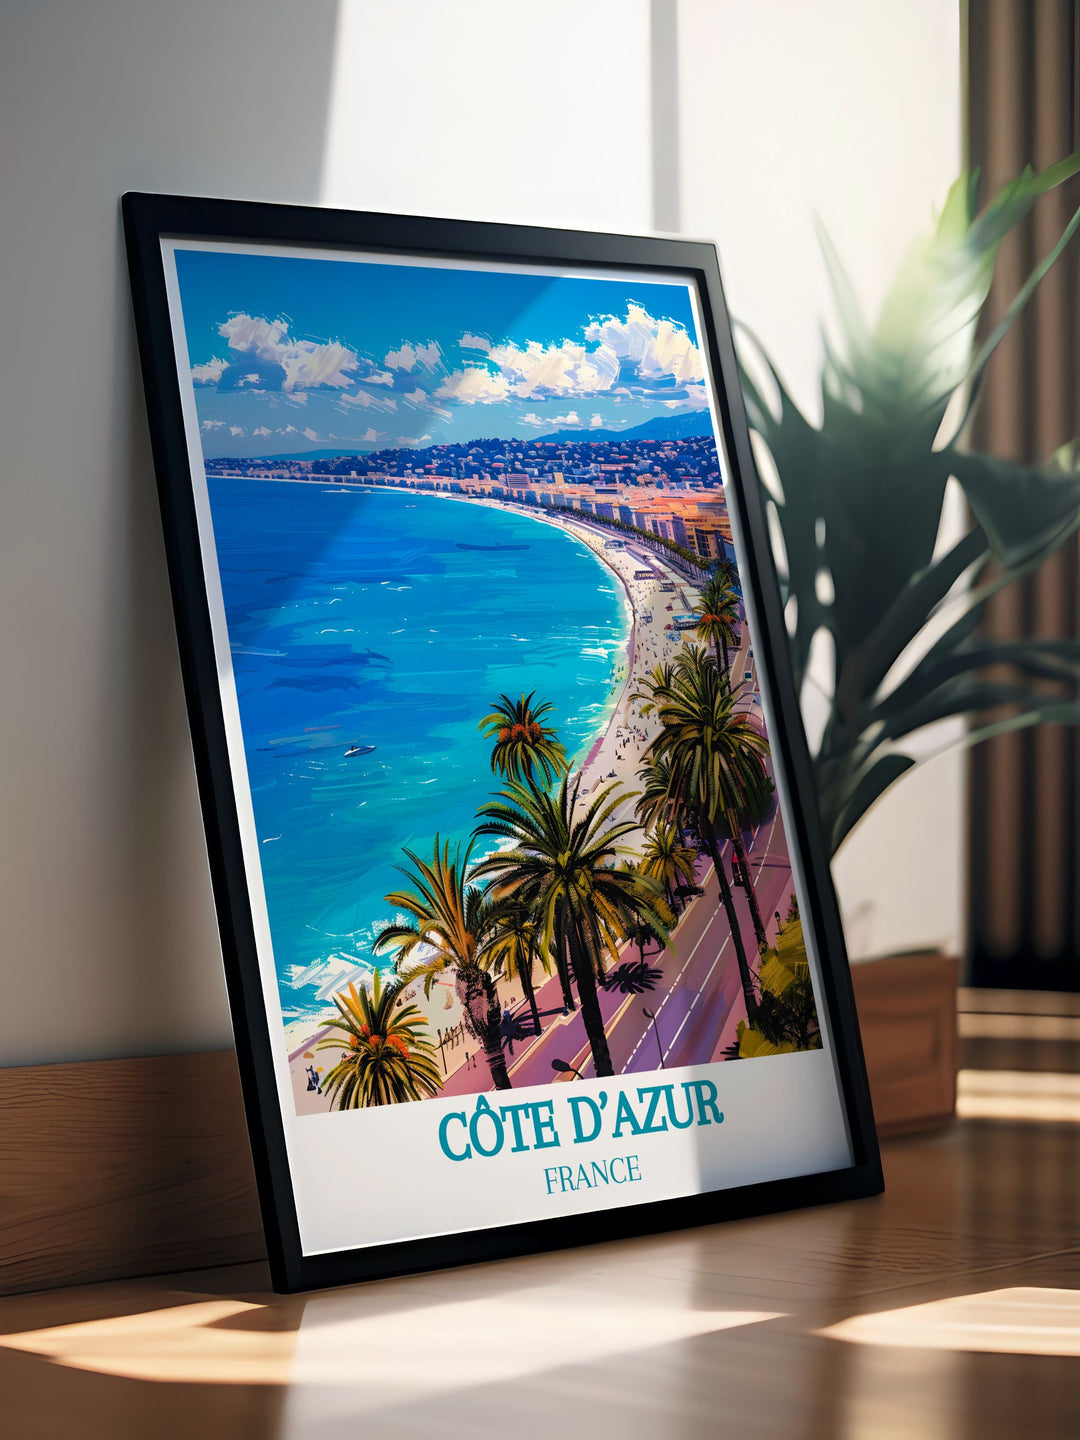 Vintage poster of the Côte dAzur, featuring the iconic Promenade des Anglais, Nice, France. This piece captures the timeless beauty of the Riviera with its charming boulevard, azure waters, and elegant architecture, evoking the charm of the Mediterranean coast.